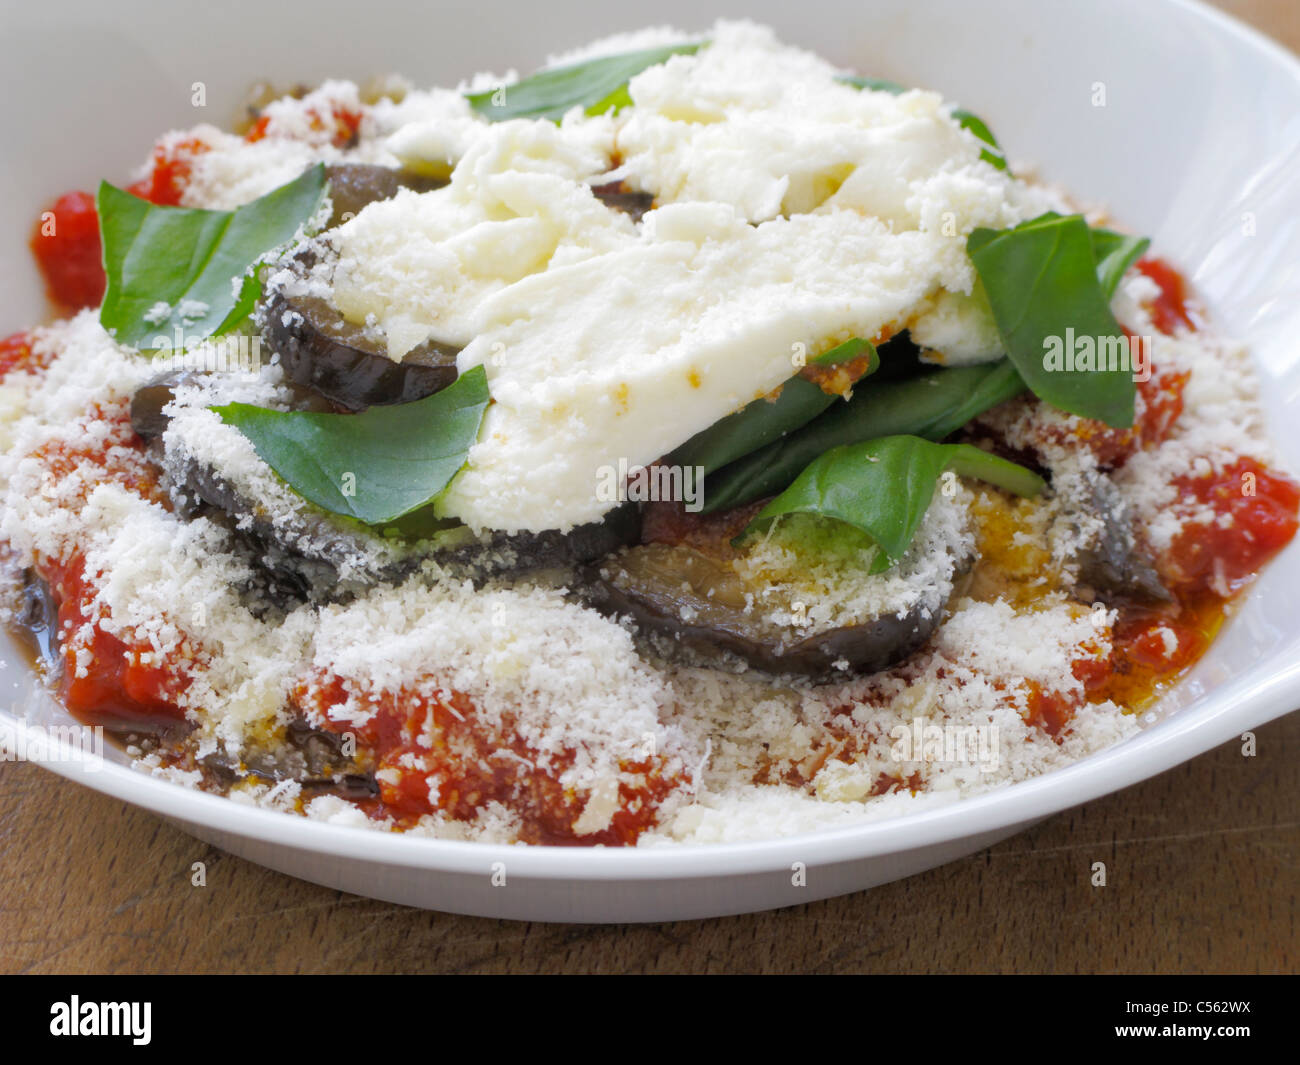 melanzane alla parmigiana individual portion in a white dish on of a wooden table kitchen chopping board prepared ready for oven Stock Photo